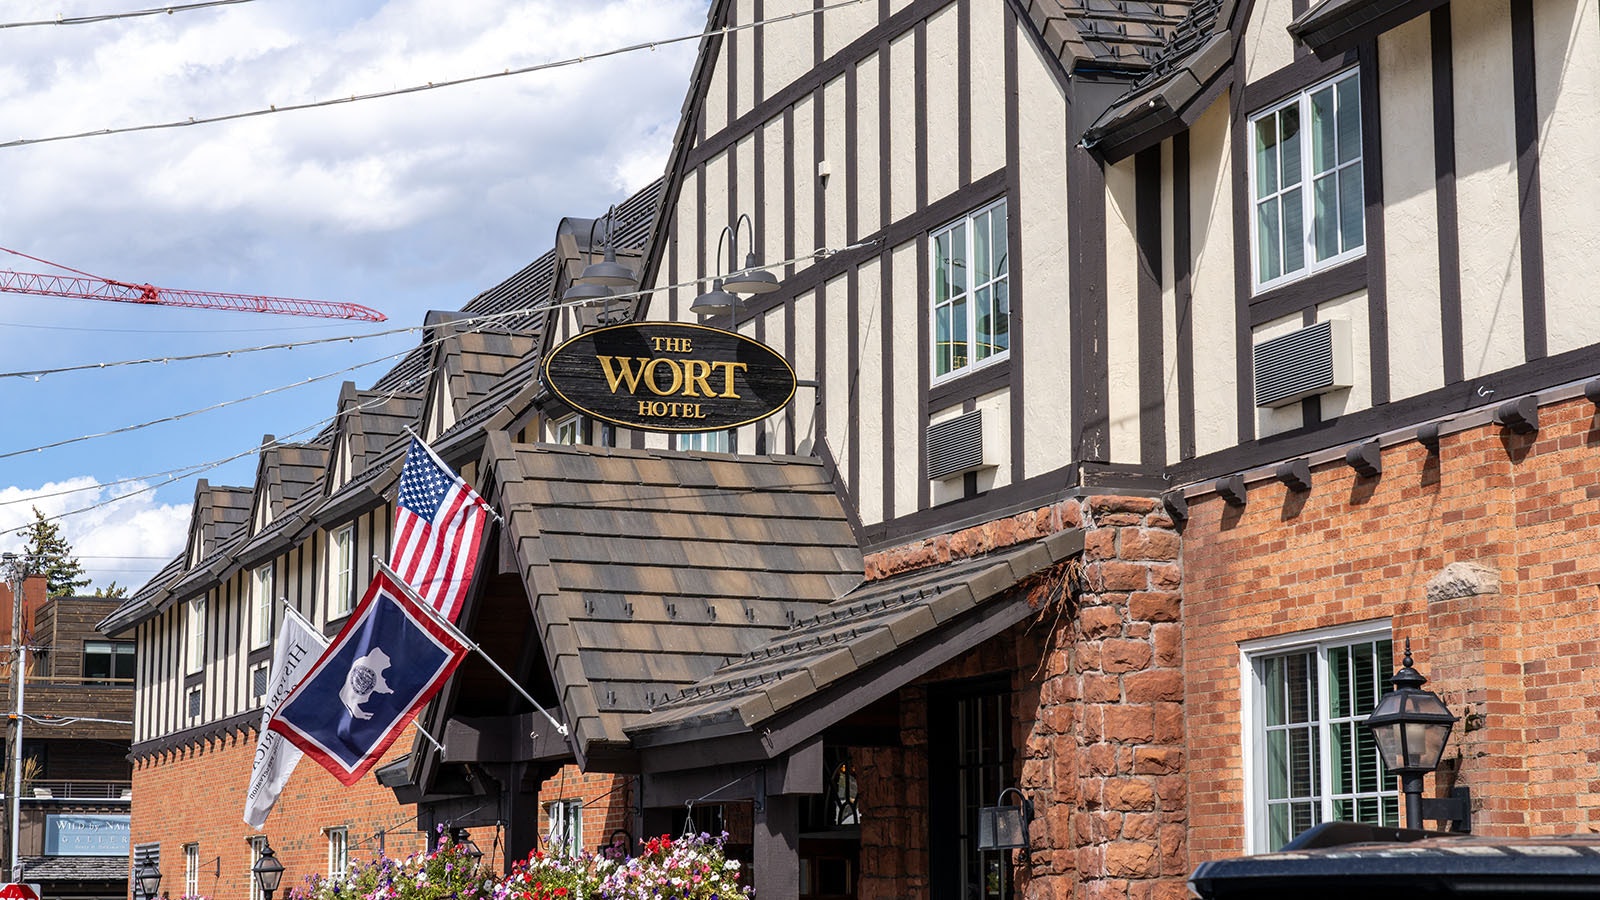 The Wort Hotel in Jackson is recognizable for its English Tudor peaks and lines.